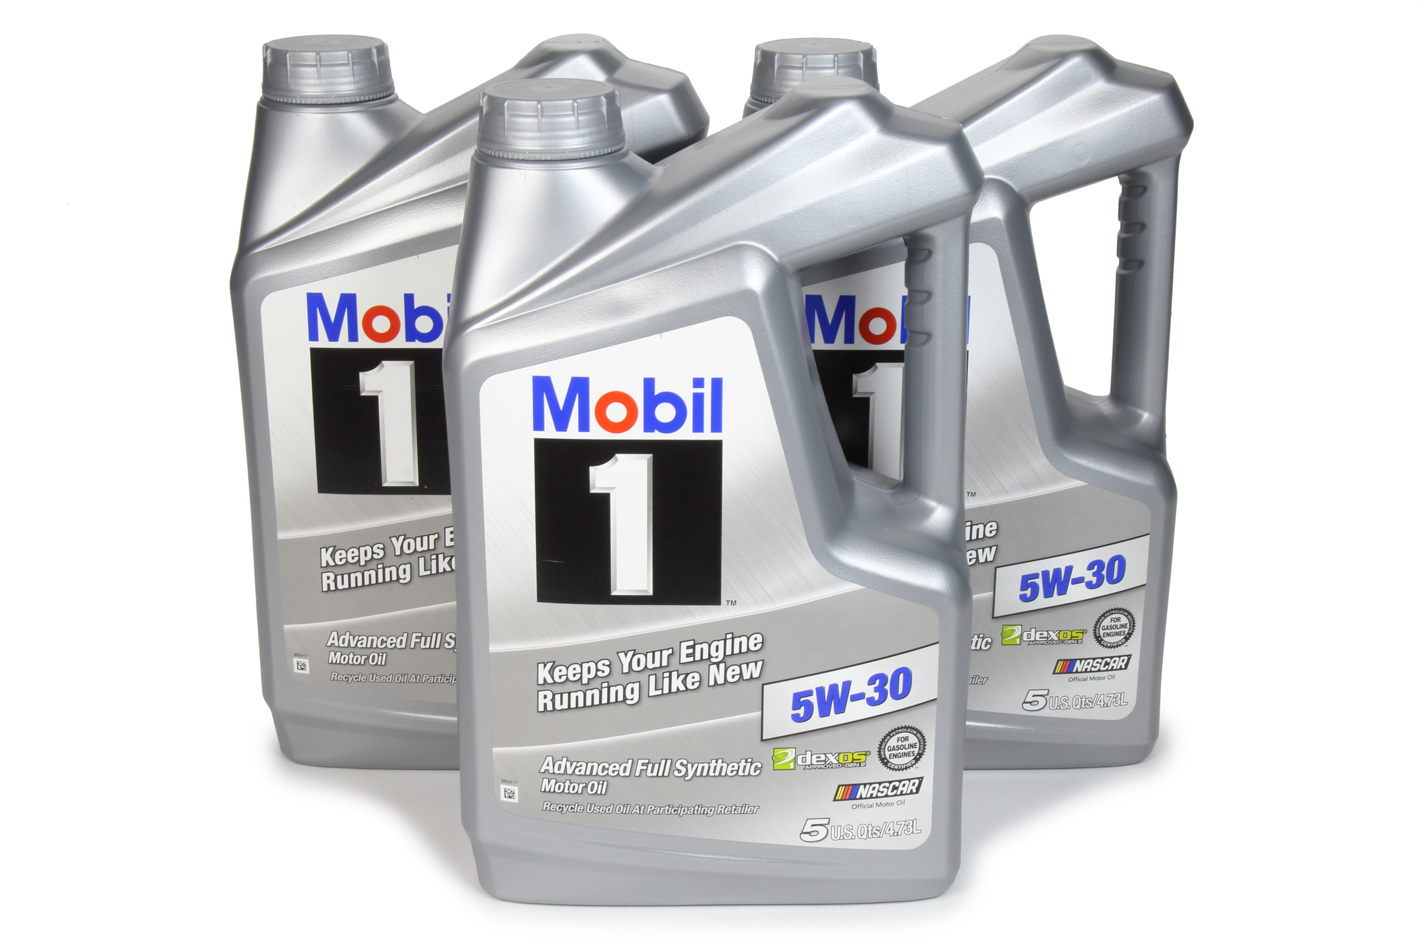 MOBIL 1 Motor Oil Advanced Full Synthetic 5W30 Synthetic 5 qt Jug Set of 3